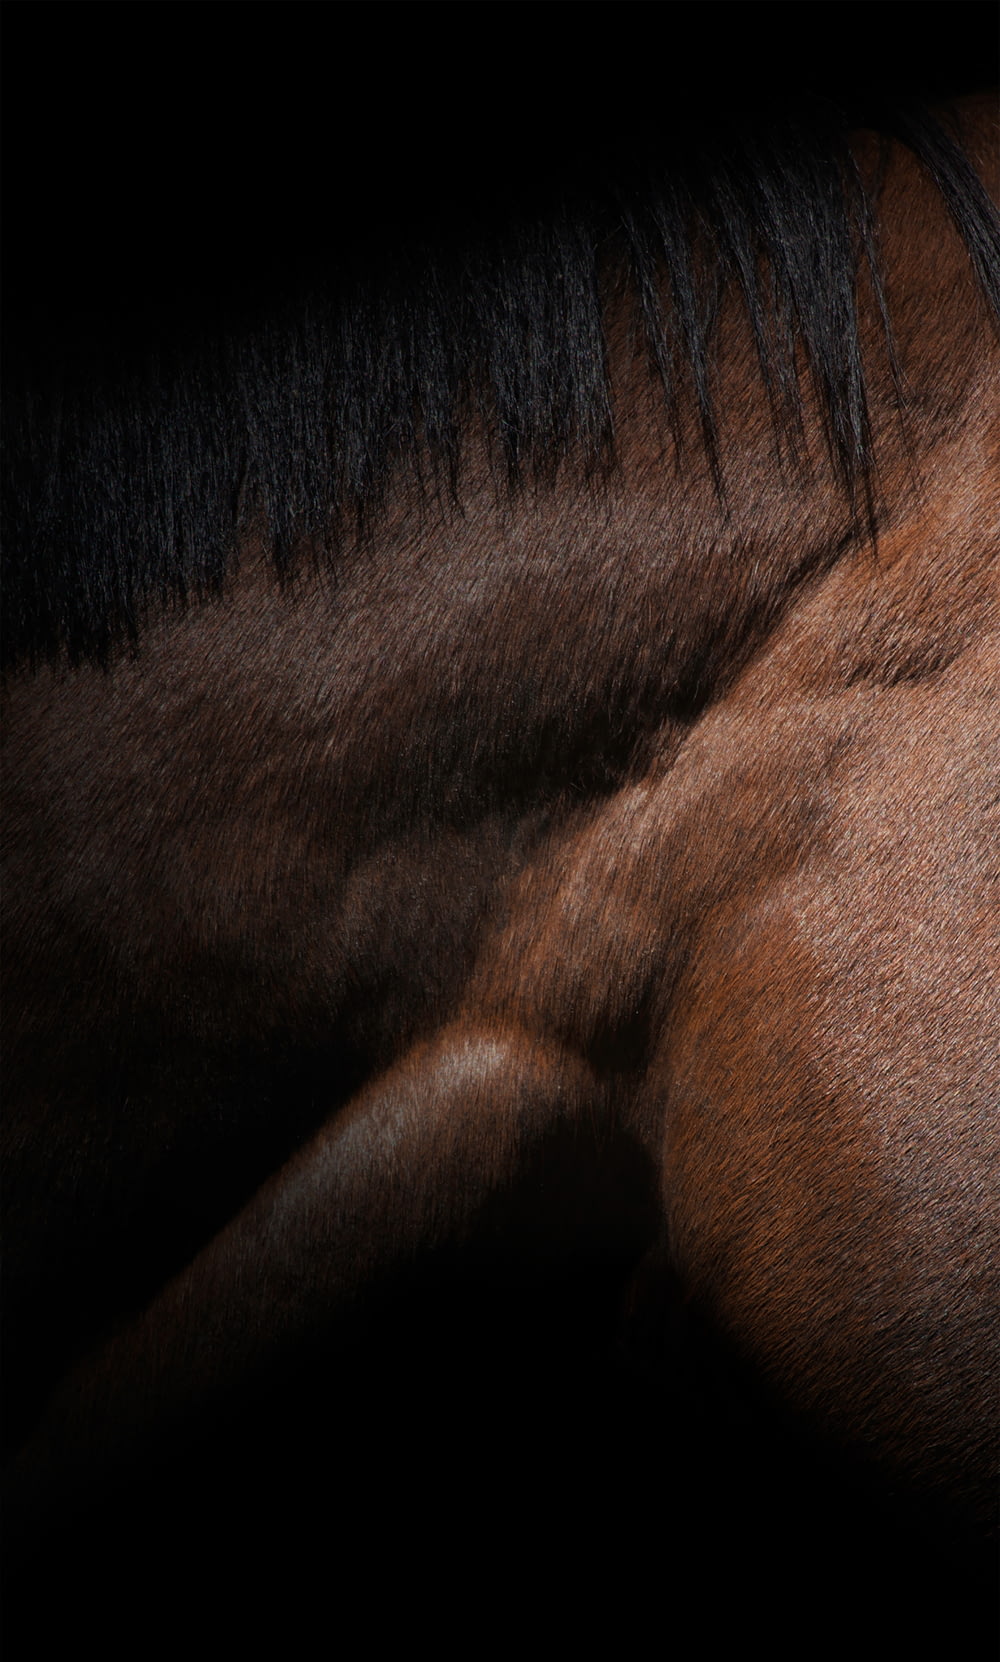 a close up of a horse's head and mane